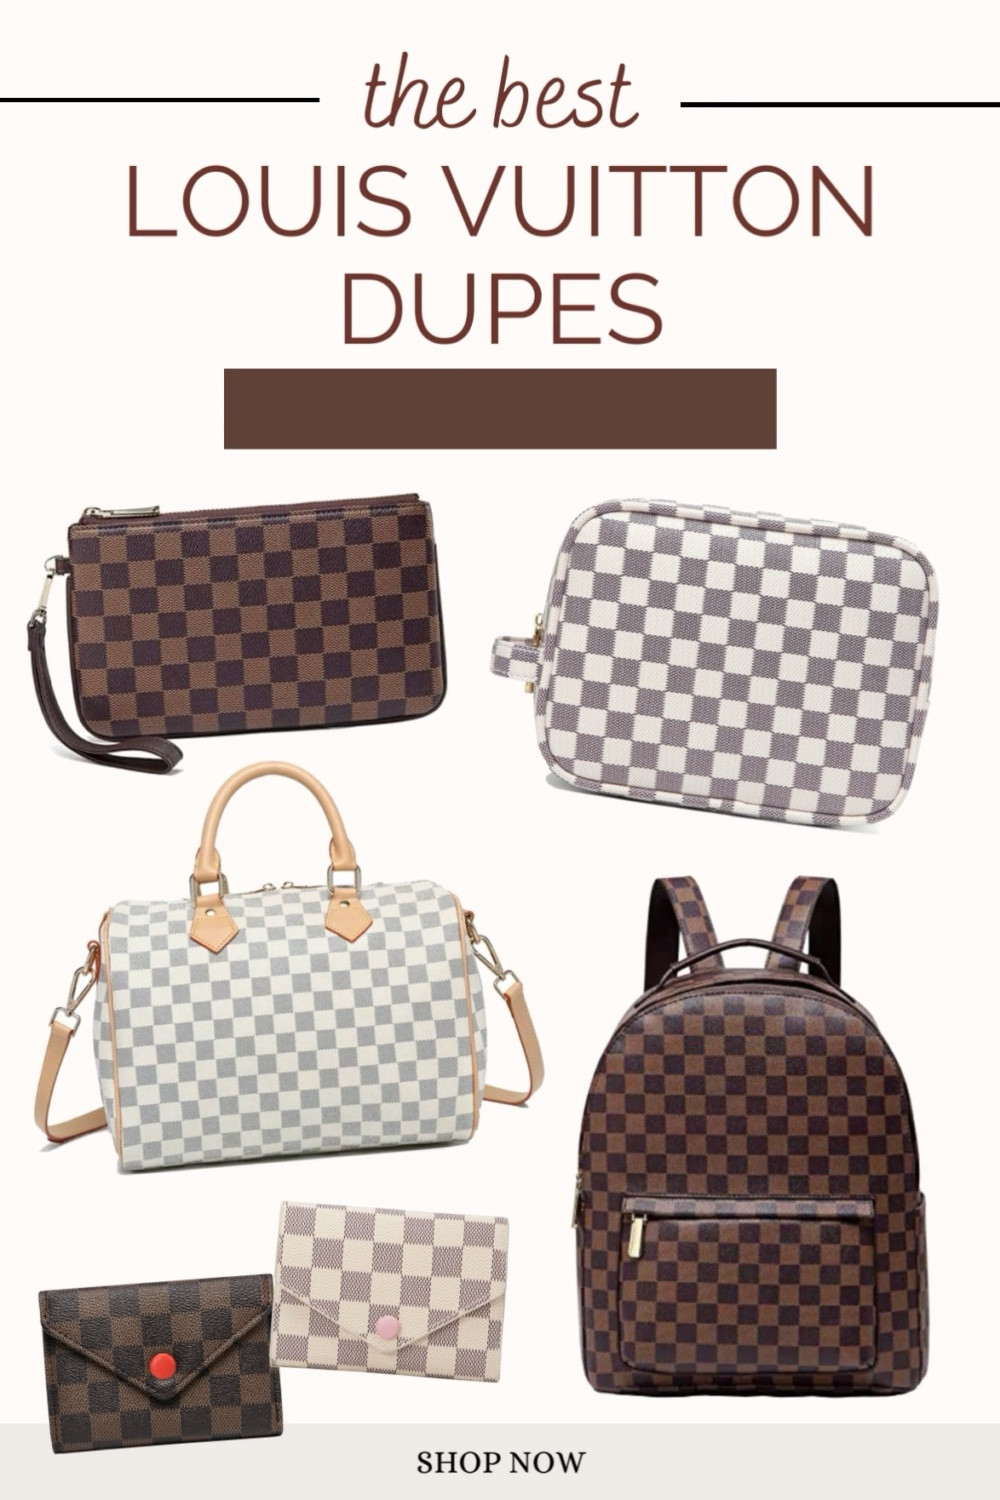 Sexy Dance White Checkered Tote Shoulder Bag With Inner Pouch